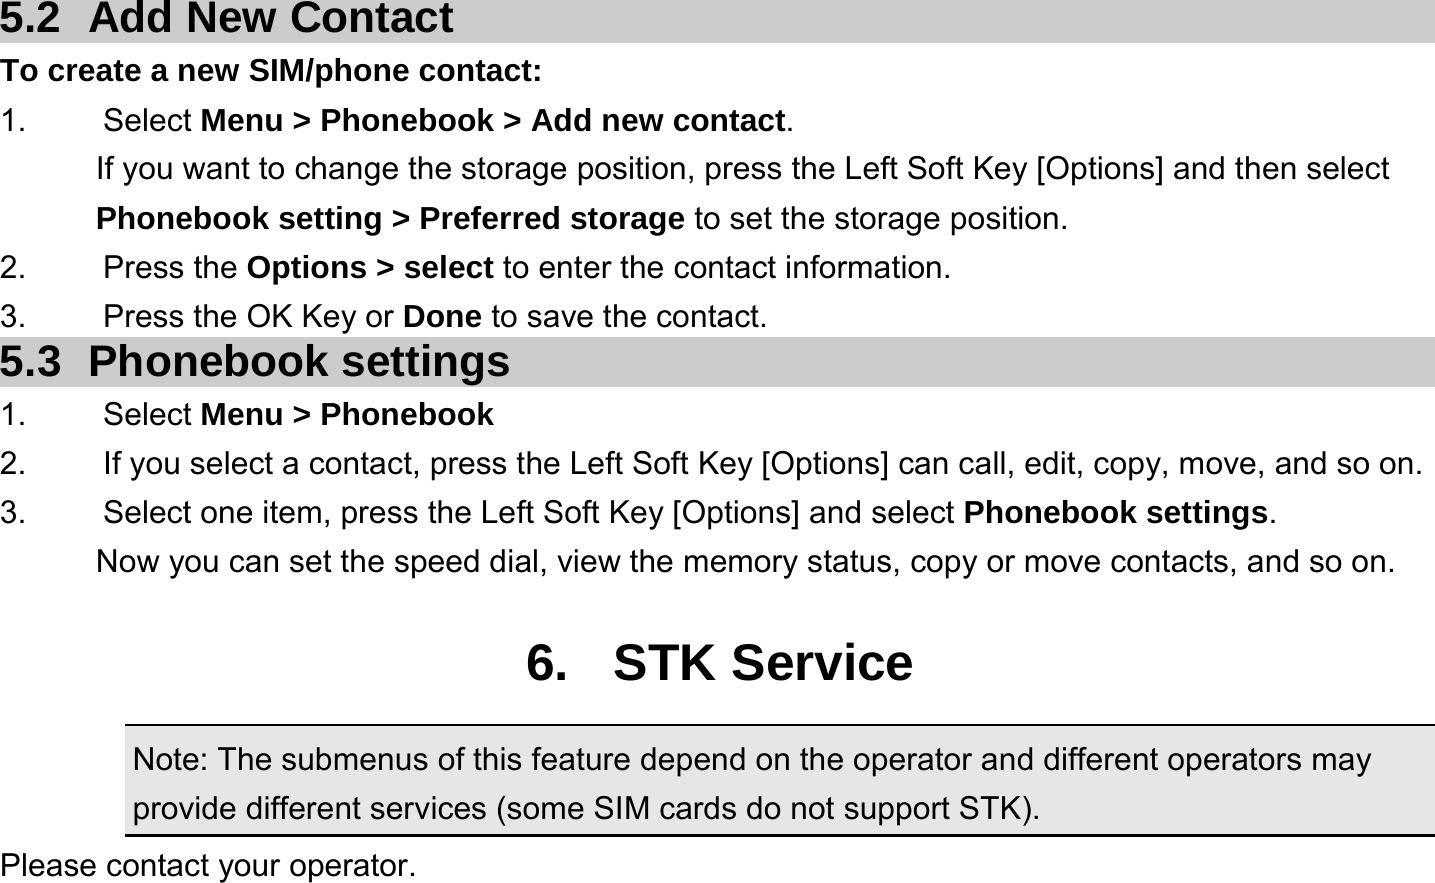  5.2  Add New Contact To create a new SIM/phone contact: 1.   Select Menu &gt; Phonebook &gt; Add new contact. If you want to change the storage position, press the Left Soft Key [Options] and then select Phonebook setting &gt; Preferred storage to set the storage position. 2.   Press the Options &gt; select to enter the contact information. 3.    Press the OK Key or Done to save the contact. 5.3 Phonebook settings 1.   Select Menu &gt; Phonebook 2.  If you select a contact, press the Left Soft Key [Options] can call, edit, copy, move, and so on. 3.  Select one item, press the Left Soft Key [Options] and select Phonebook settings. Now you can set the speed dial, view the memory status, copy or move contacts, and so on.  6. STK Service Note: The submenus of this feature depend on the operator and different operators may provide different services (some SIM cards do not support STK). Please contact your operator.  